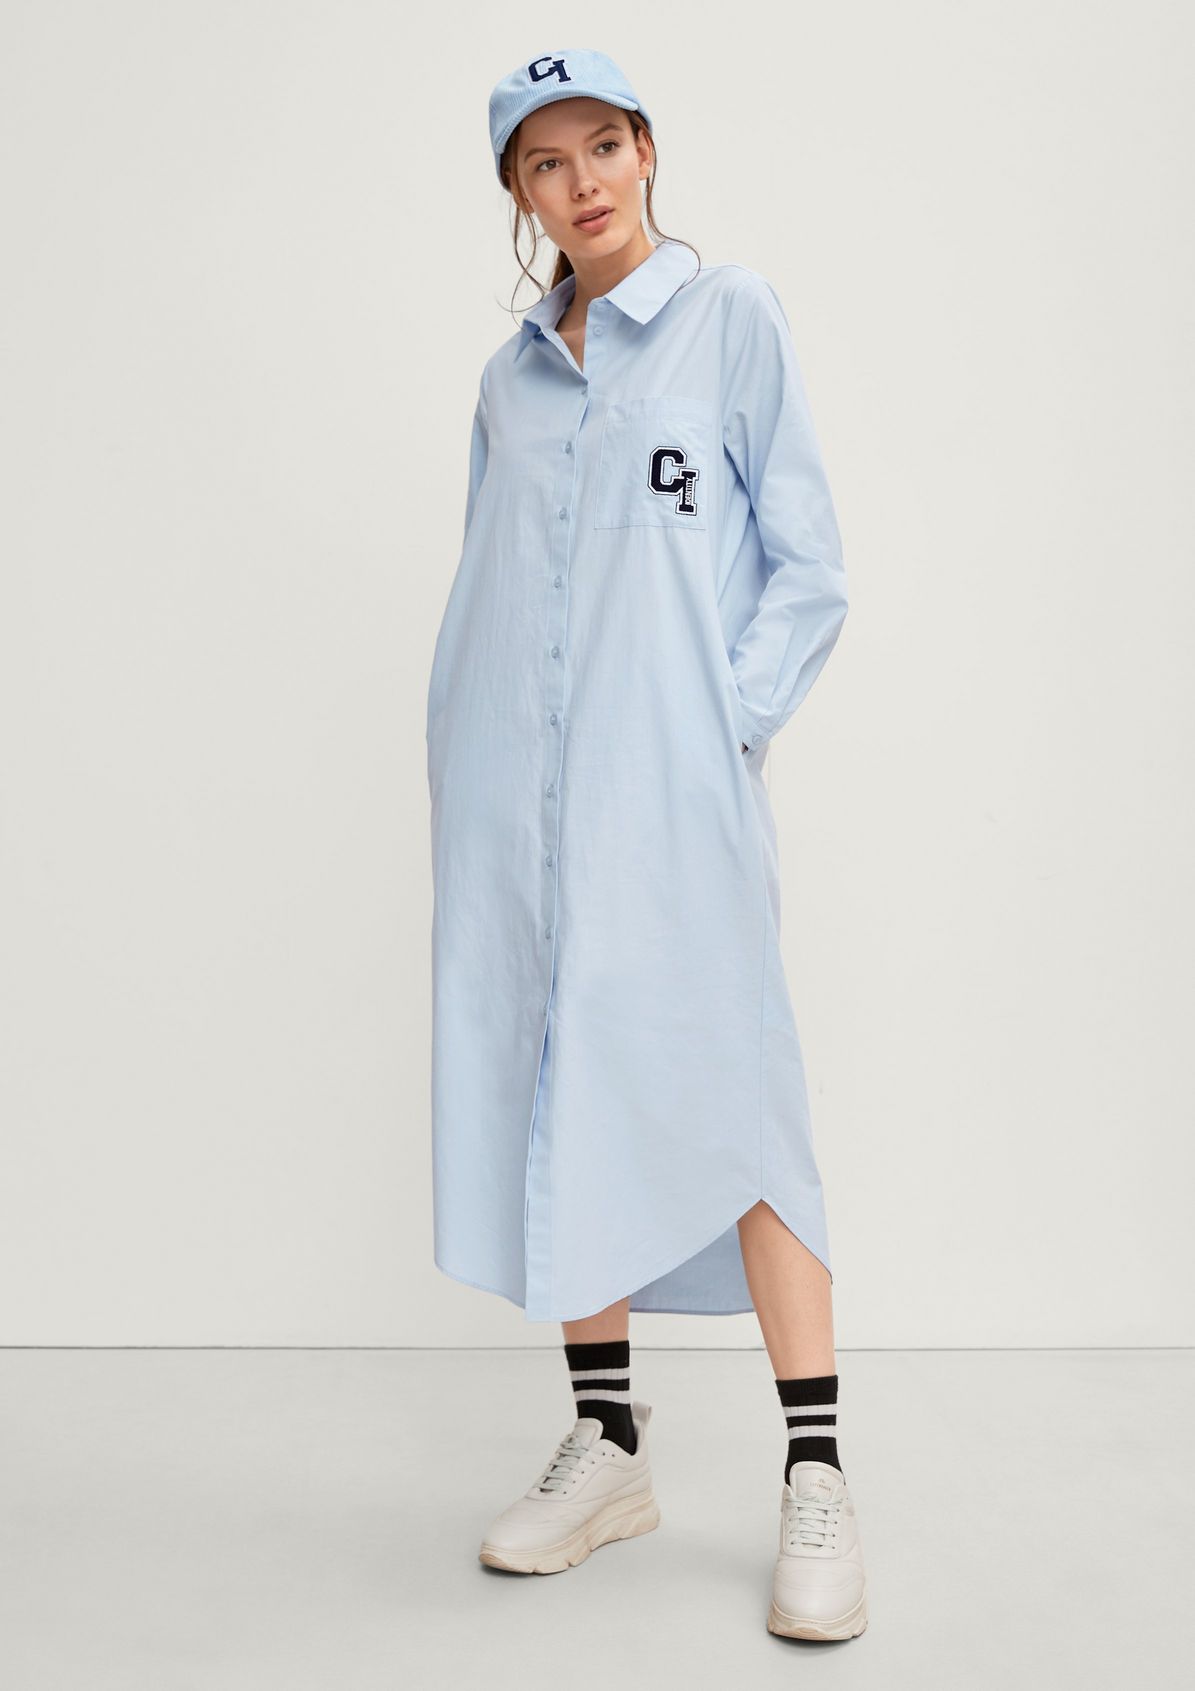 College-style cotton dress from comma